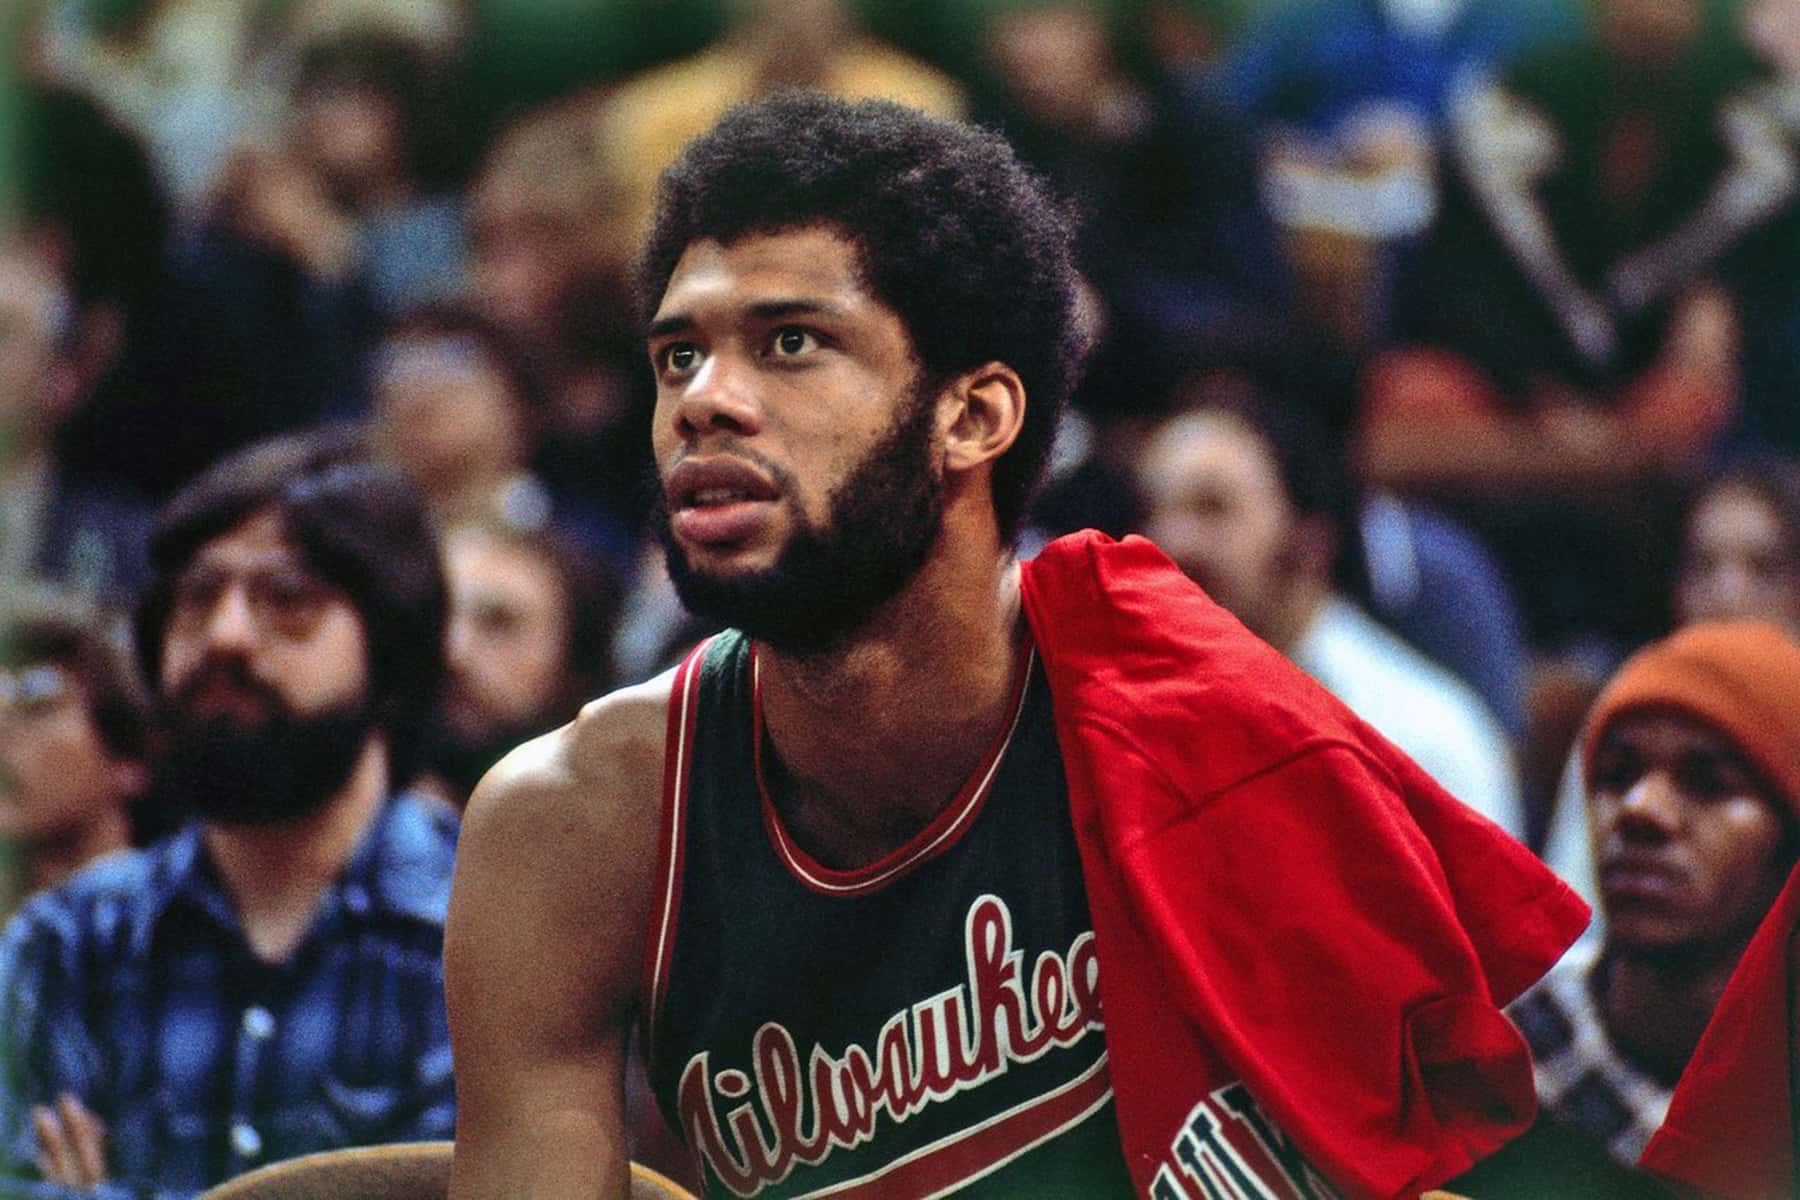 Little has changed since Kareem Abdul-Jabbar called for an end to  institutional racism in Milwaukee in 1971